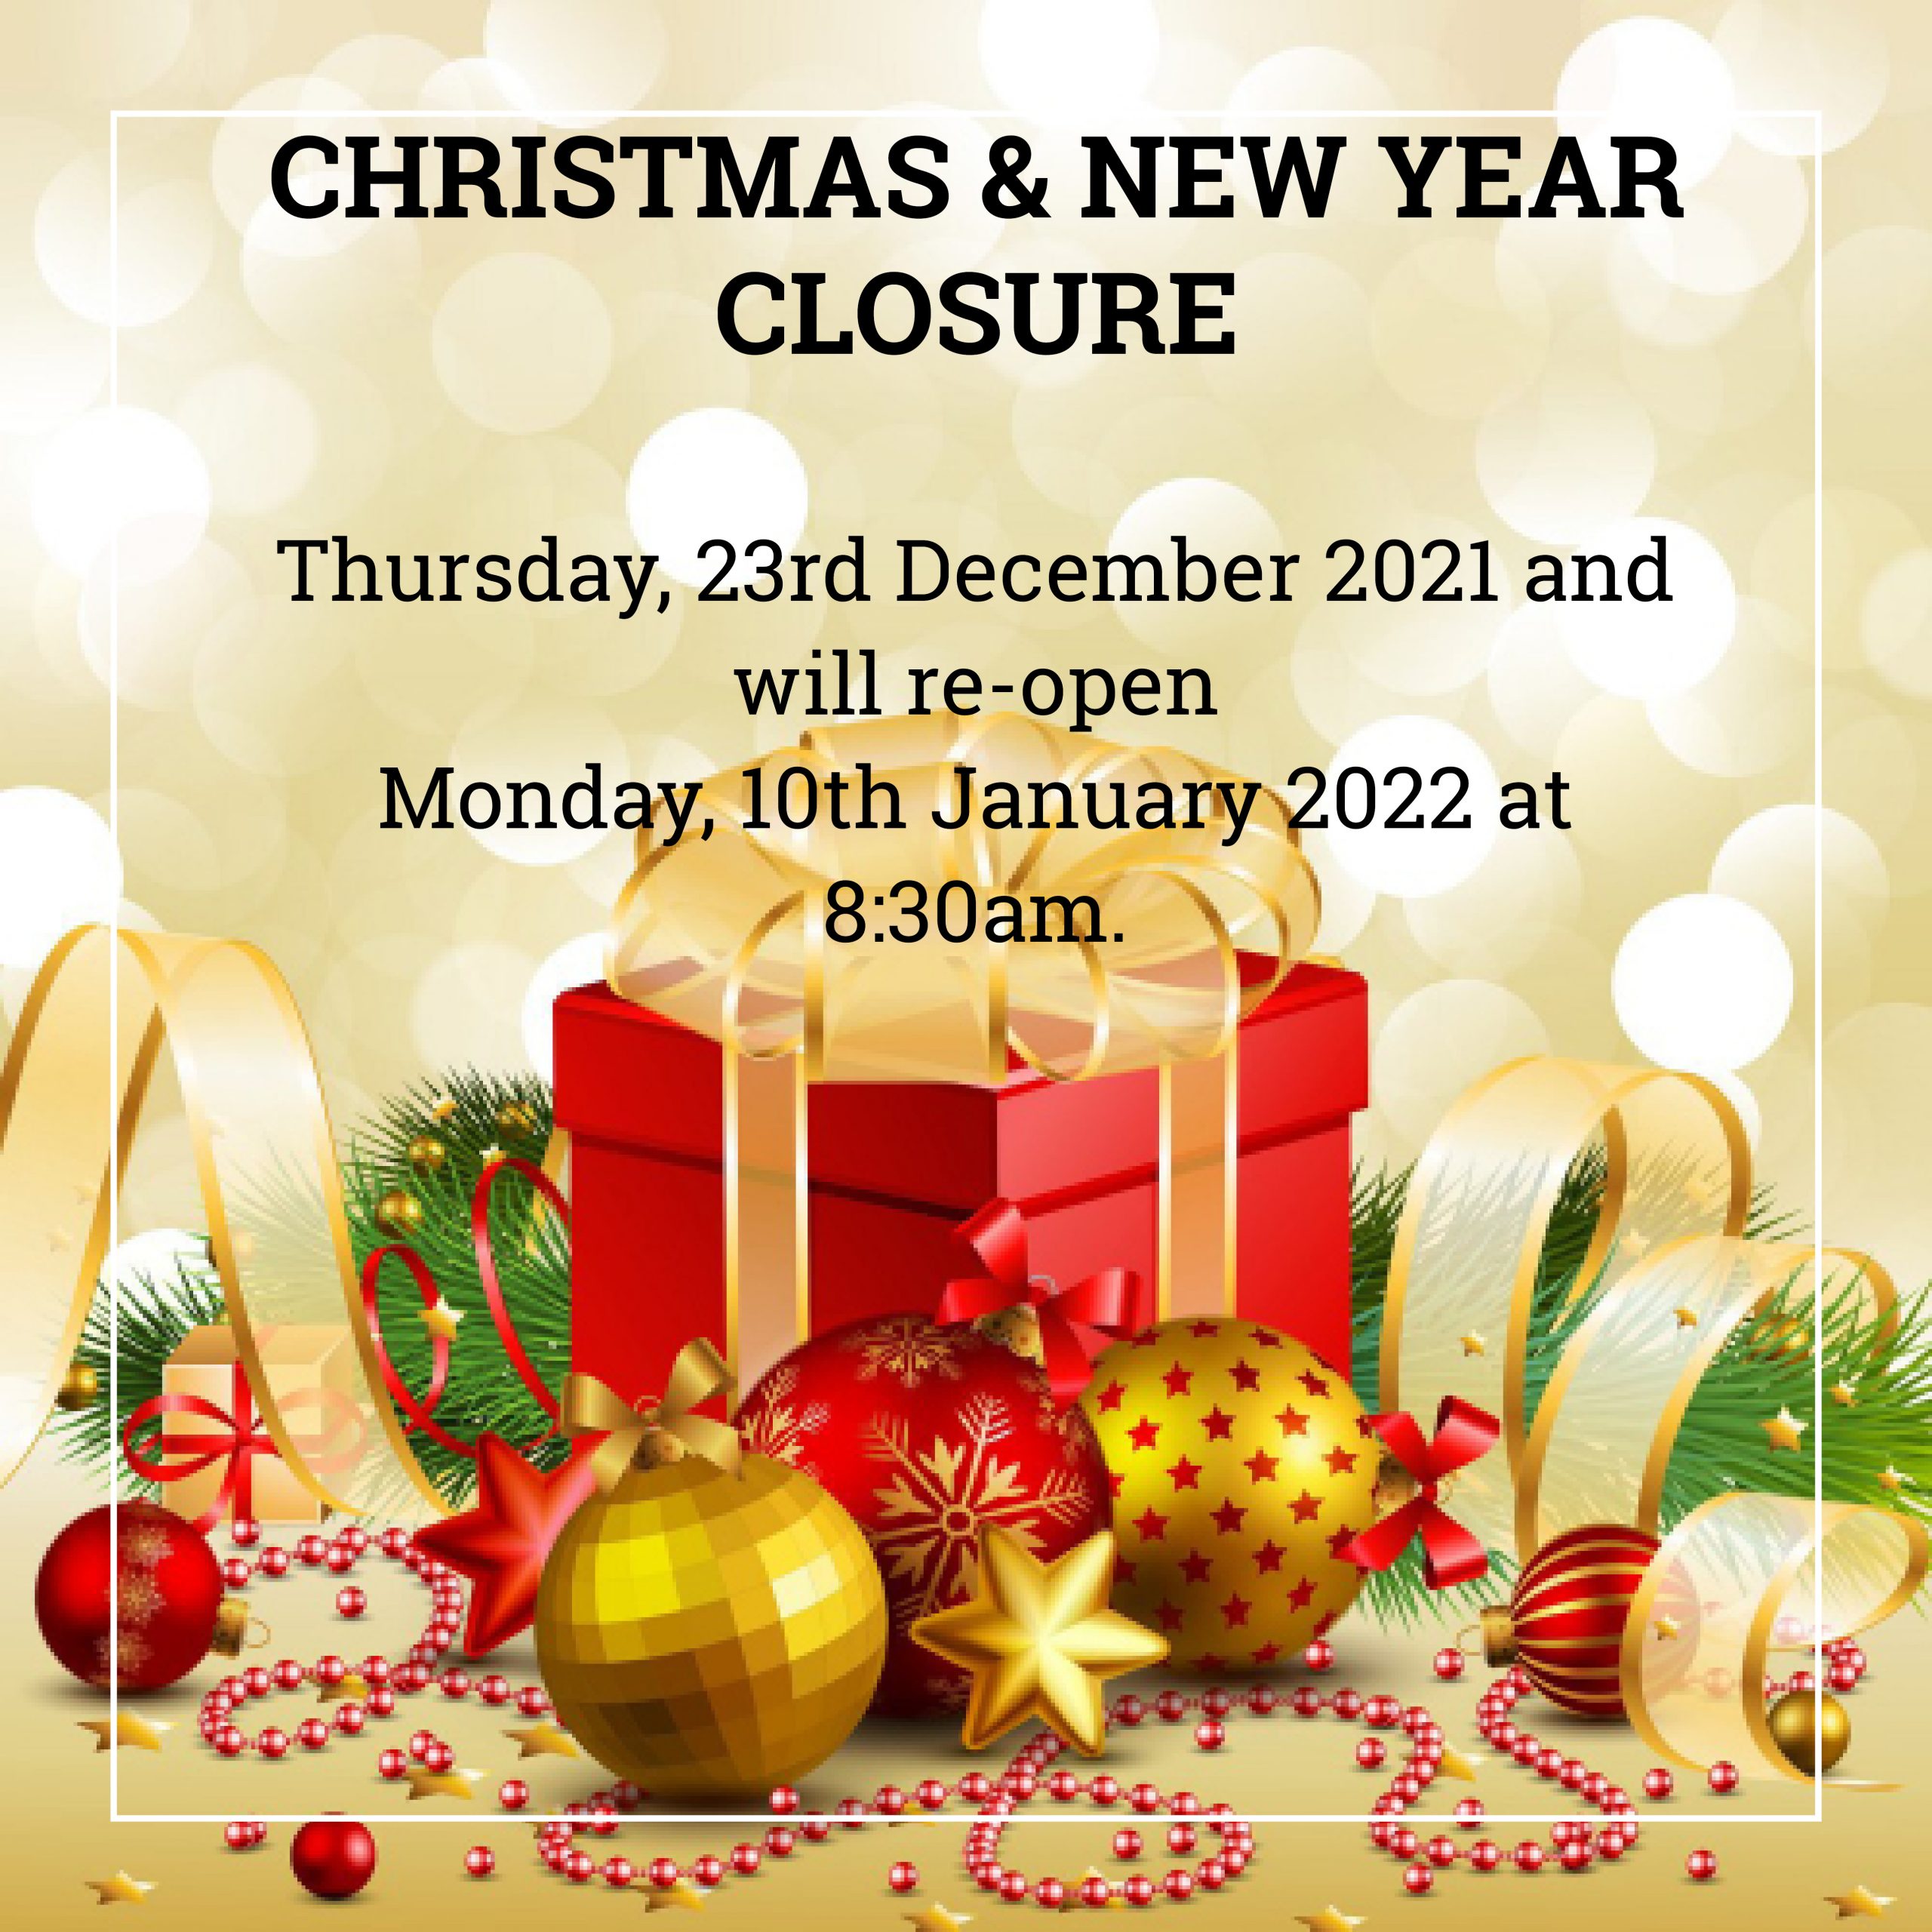 CHRISTMAS AND NEW YEAR CLOSURE